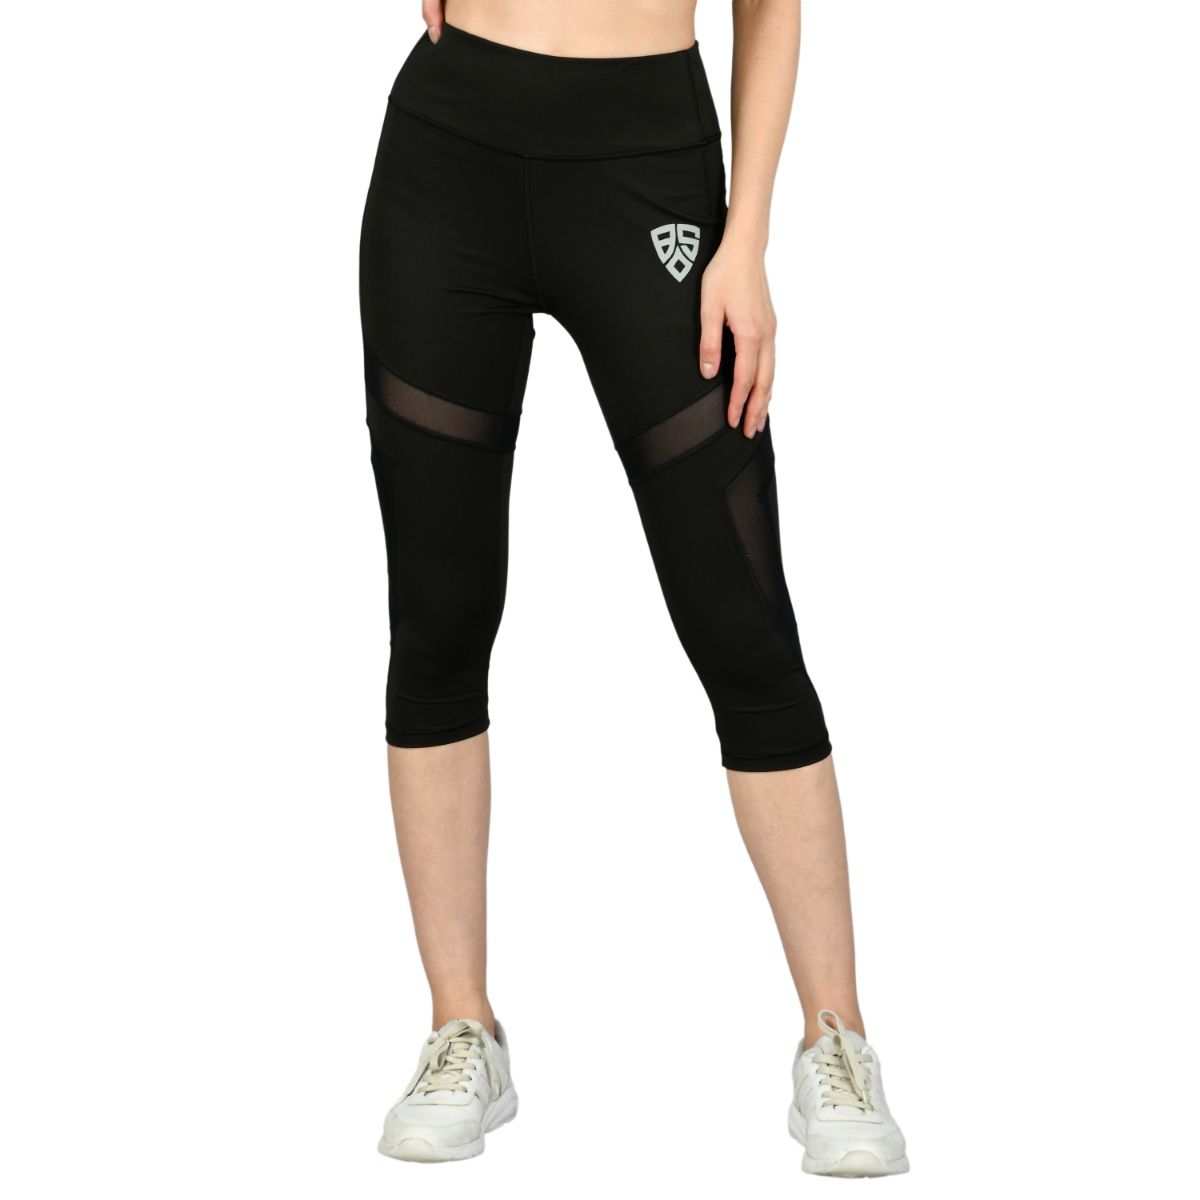 The Best Capri Leggings To Wear For Your Workouts  Gymshark Central